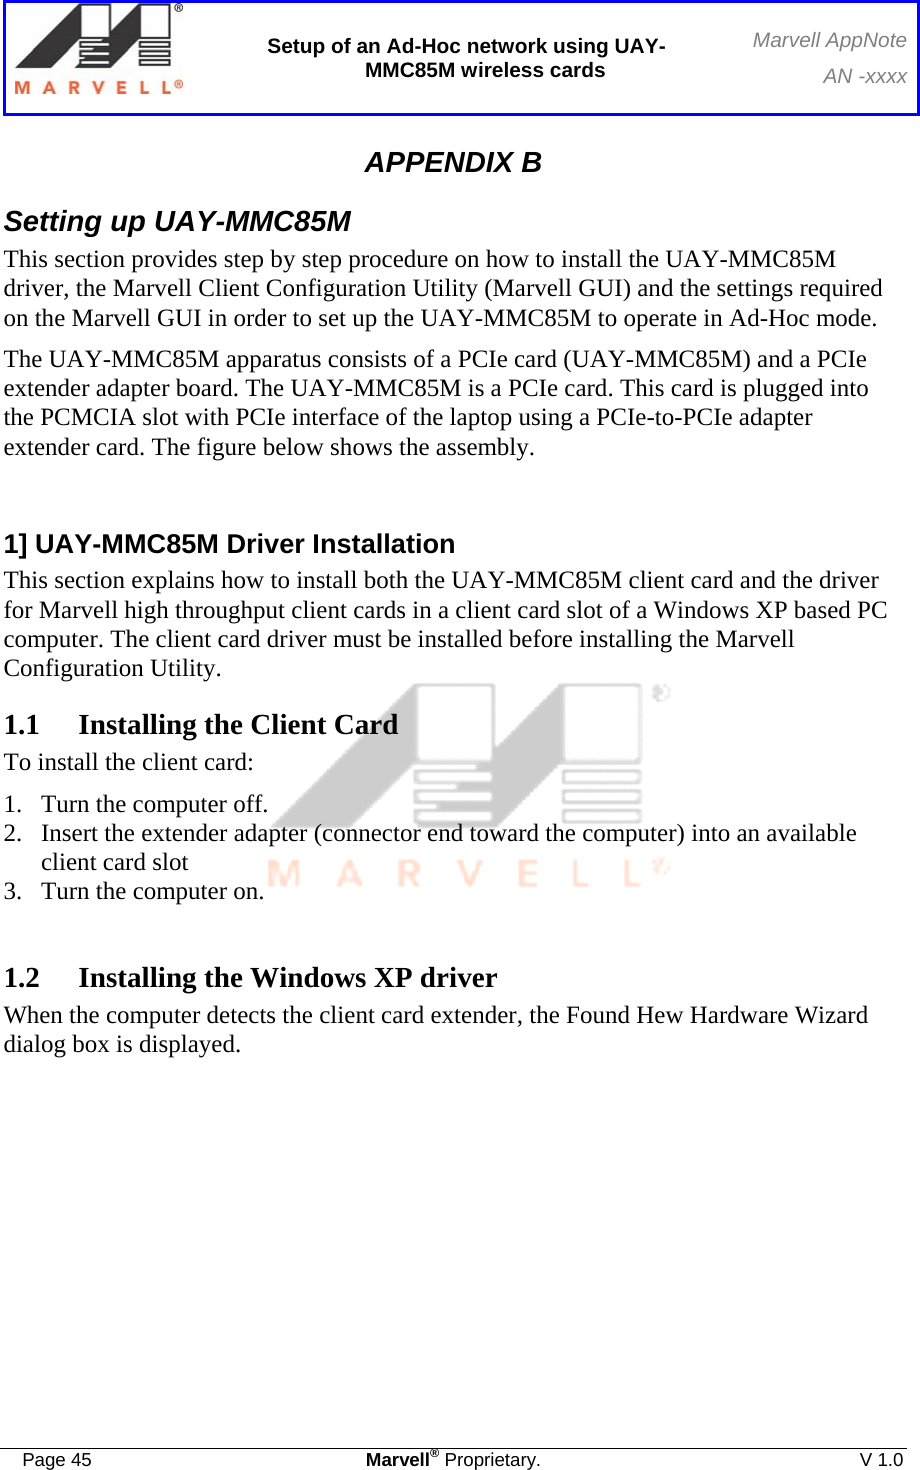  Setup of an Ad-Hoc network using UAY-MMC85M wireless cards Marvell AppNoteAN -xxxx  Page 45  Marvell® Proprietary.  V 1.0  APPENDIX B Setting up UAY-MMC85M This section provides step by step procedure on how to install the UAY-MMC85M driver, the Marvell Client Configuration Utility (Marvell GUI) and the settings required on the Marvell GUI in order to set up the UAY-MMC85M to operate in Ad-Hoc mode. The UAY-MMC85M apparatus consists of a PCIe card (UAY-MMC85M) and a PCIe extender adapter board. The UAY-MMC85M is a PCIe card. This card is plugged into the PCMCIA slot with PCIe interface of the laptop using a PCIe-to-PCIe adapter extender card. The figure below shows the assembly.  1] UAY-MMC85M Driver Installation This section explains how to install both the UAY-MMC85M client card and the driver for Marvell high throughput client cards in a client card slot of a Windows XP based PC computer. The client card driver must be installed before installing the Marvell Configuration Utility. 1.1  Installing the Client Card To install the client card: 1.  Turn the computer off. 2.  Insert the extender adapter (connector end toward the computer) into an available client card slot 3.  Turn the computer on.  1.2  Installing the Windows XP driver When the computer detects the client card extender, the Found Hew Hardware Wizard dialog box is displayed.  